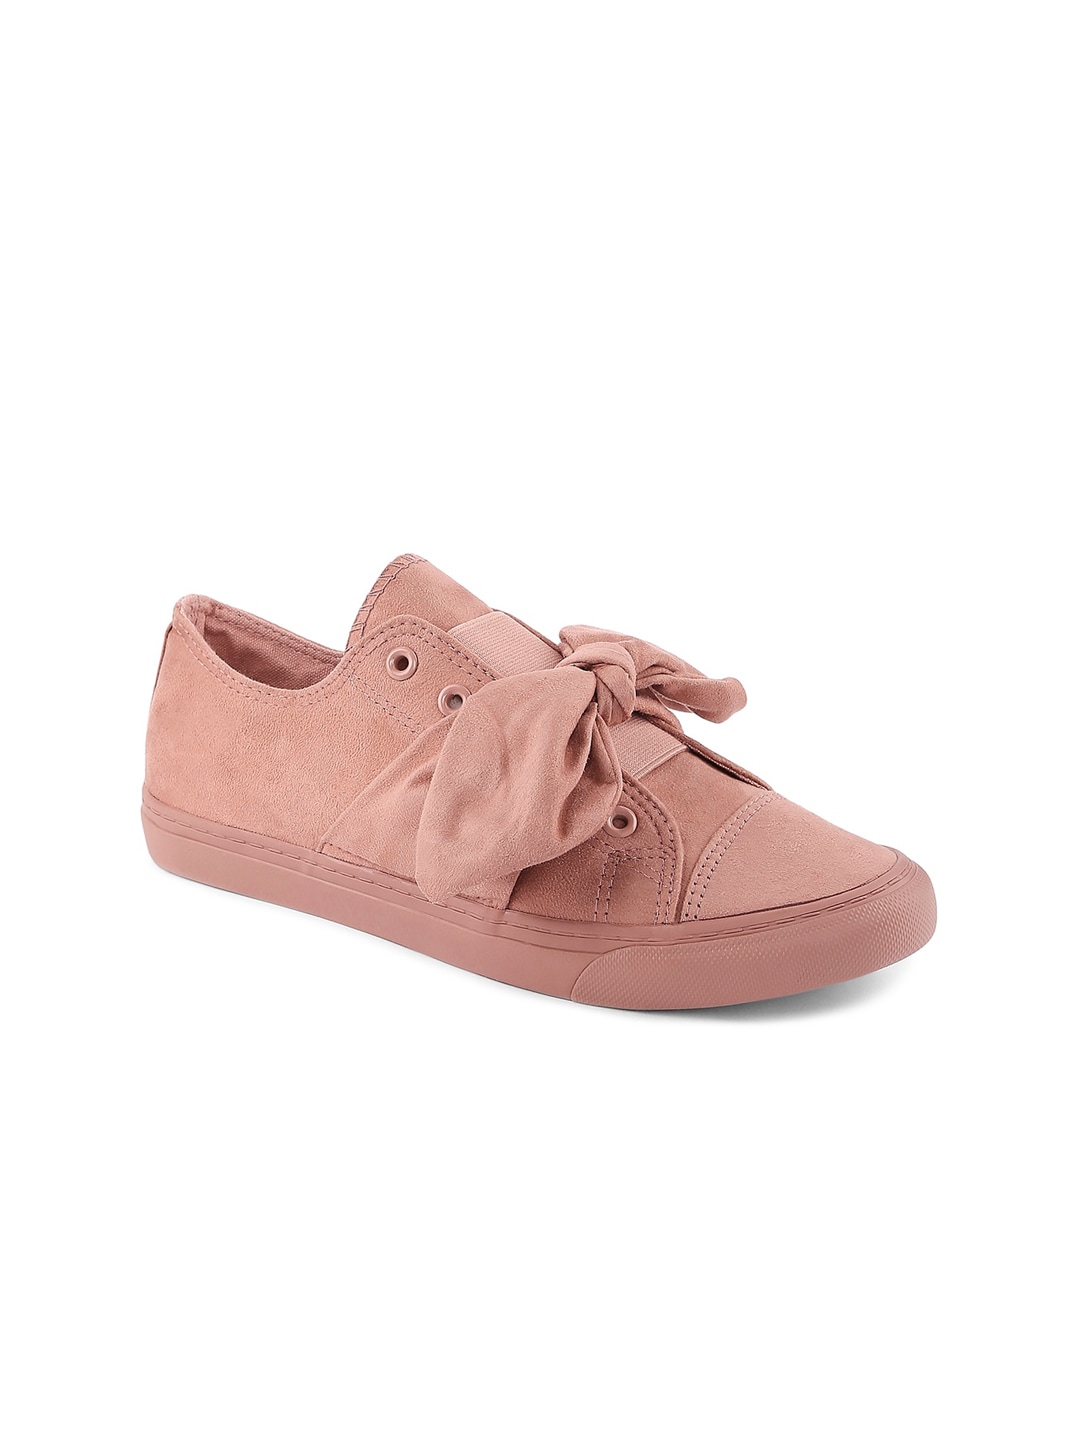 Forever Glam by Pantaloons Women Pink Solid Sneakers with a Bow Price in India